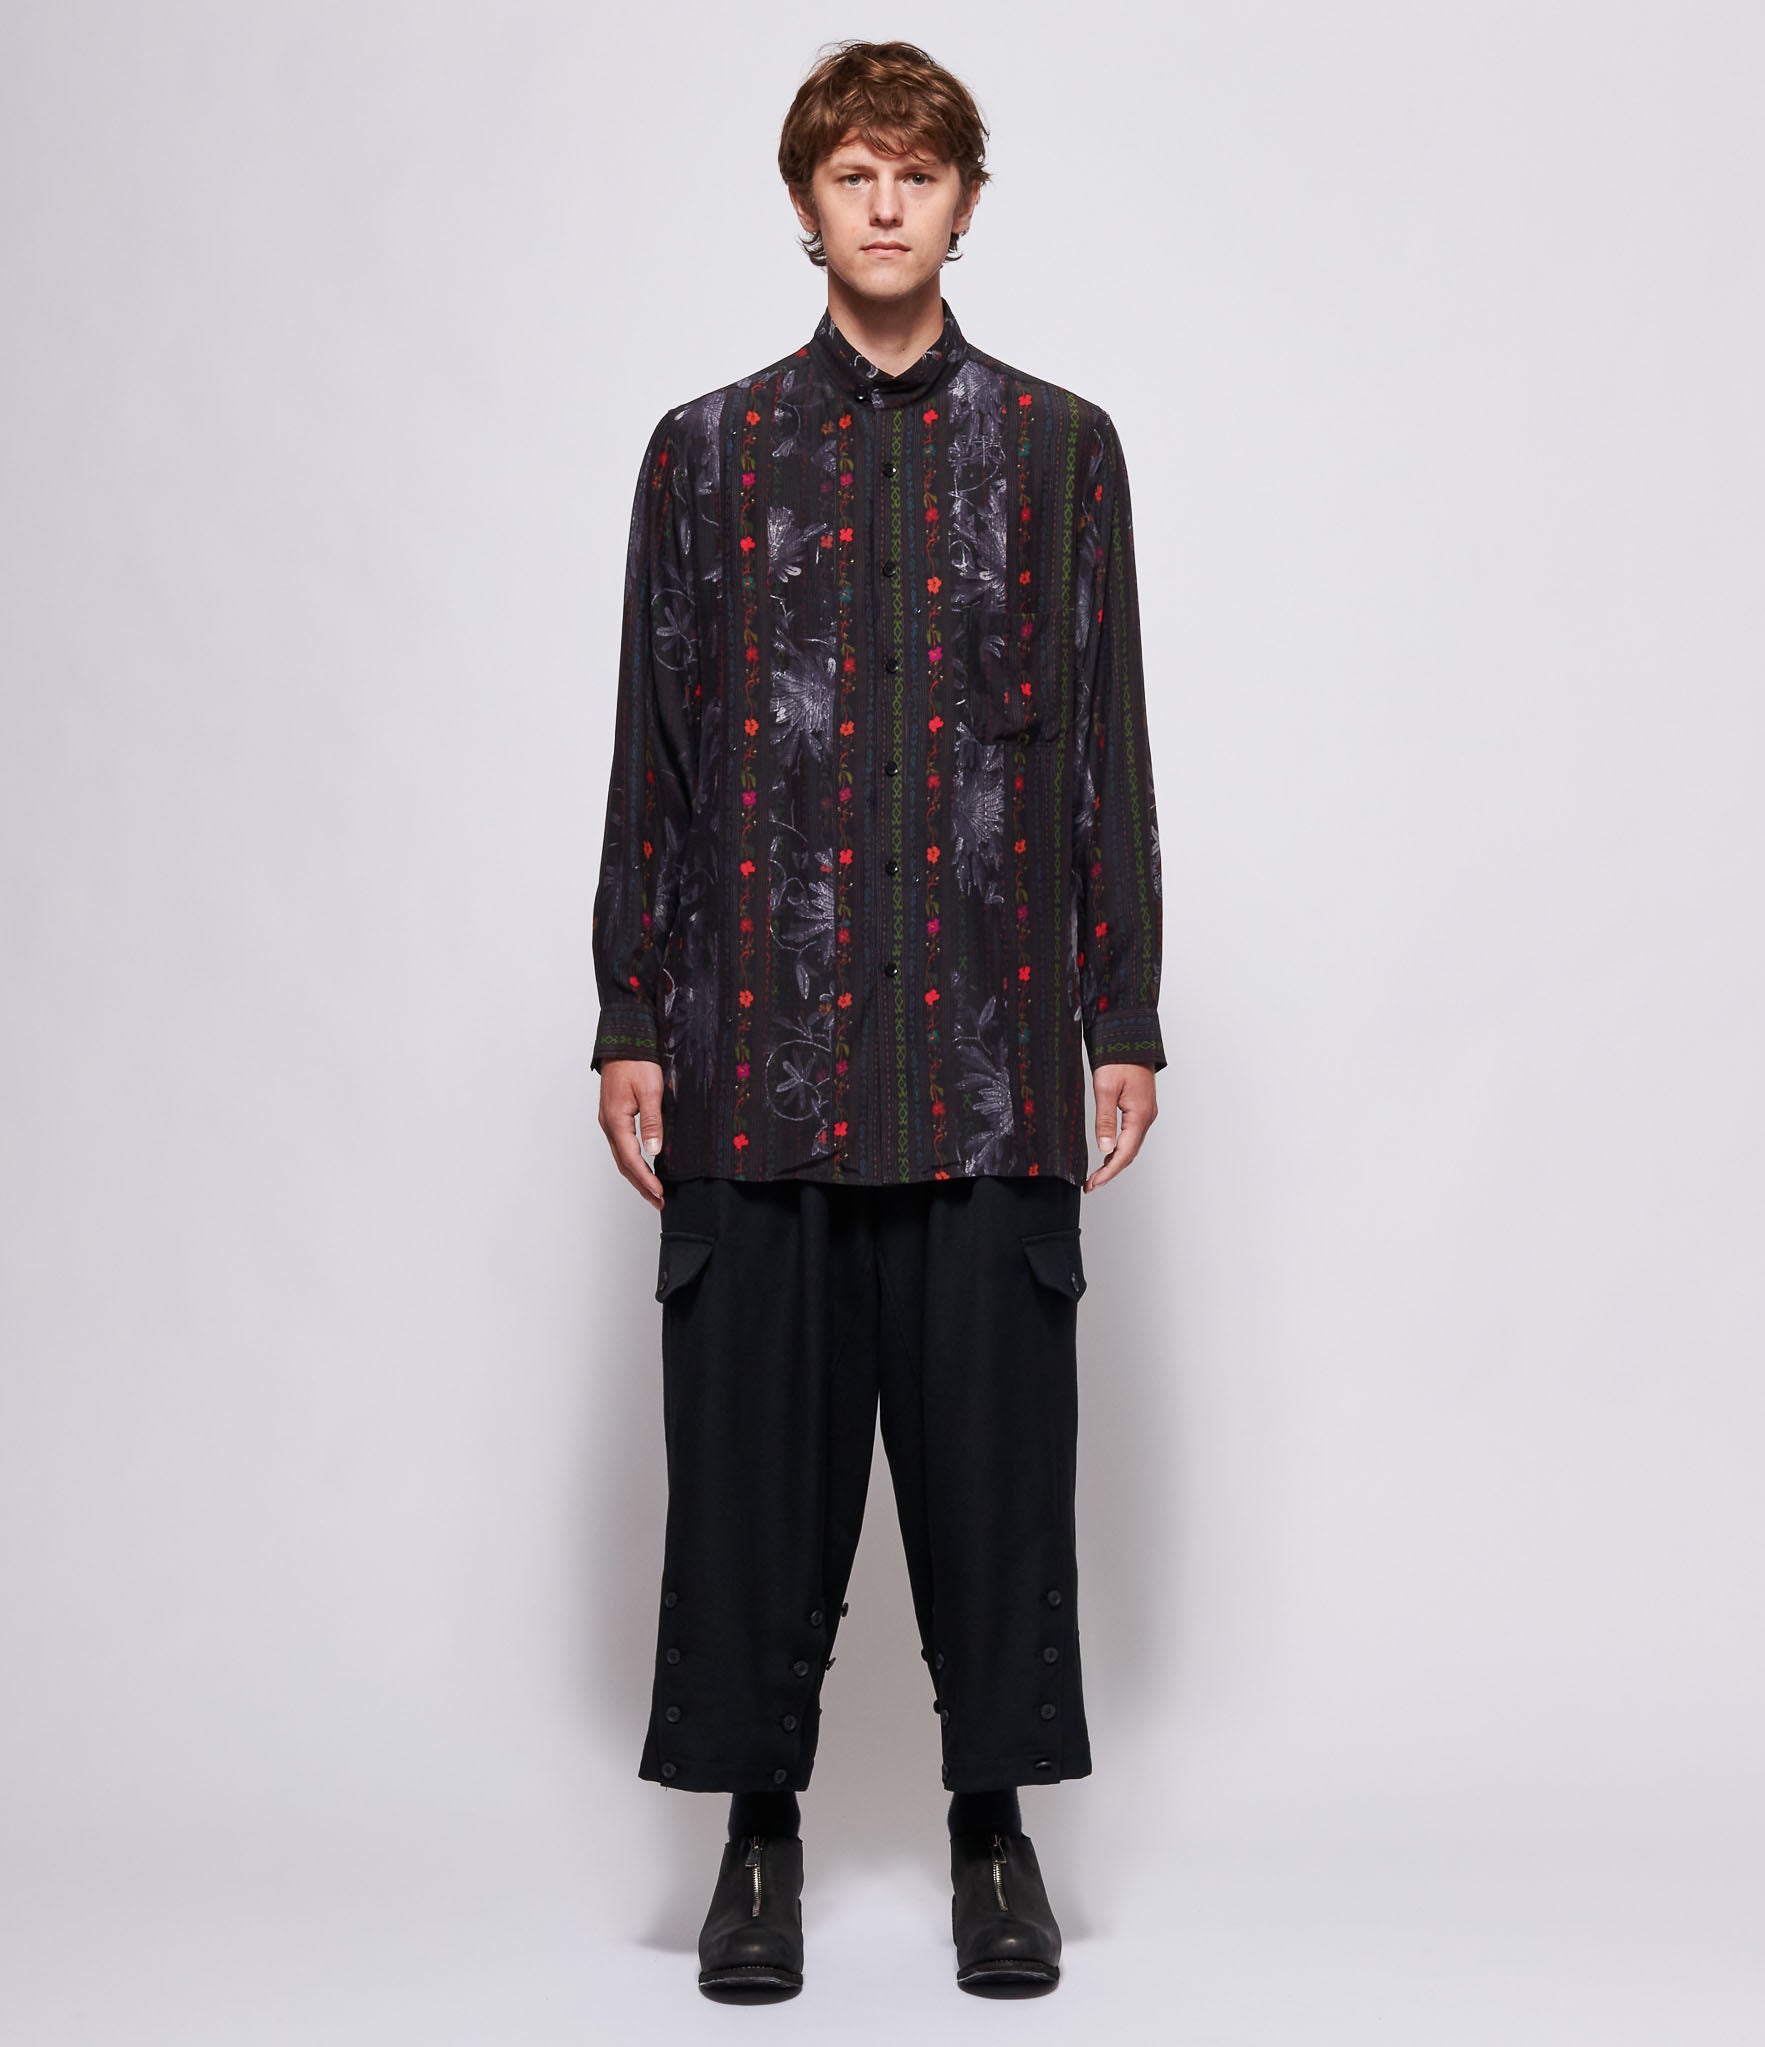 Yohji Yamamoto Pour Homme A-Ethnic 6 Stand Blouse